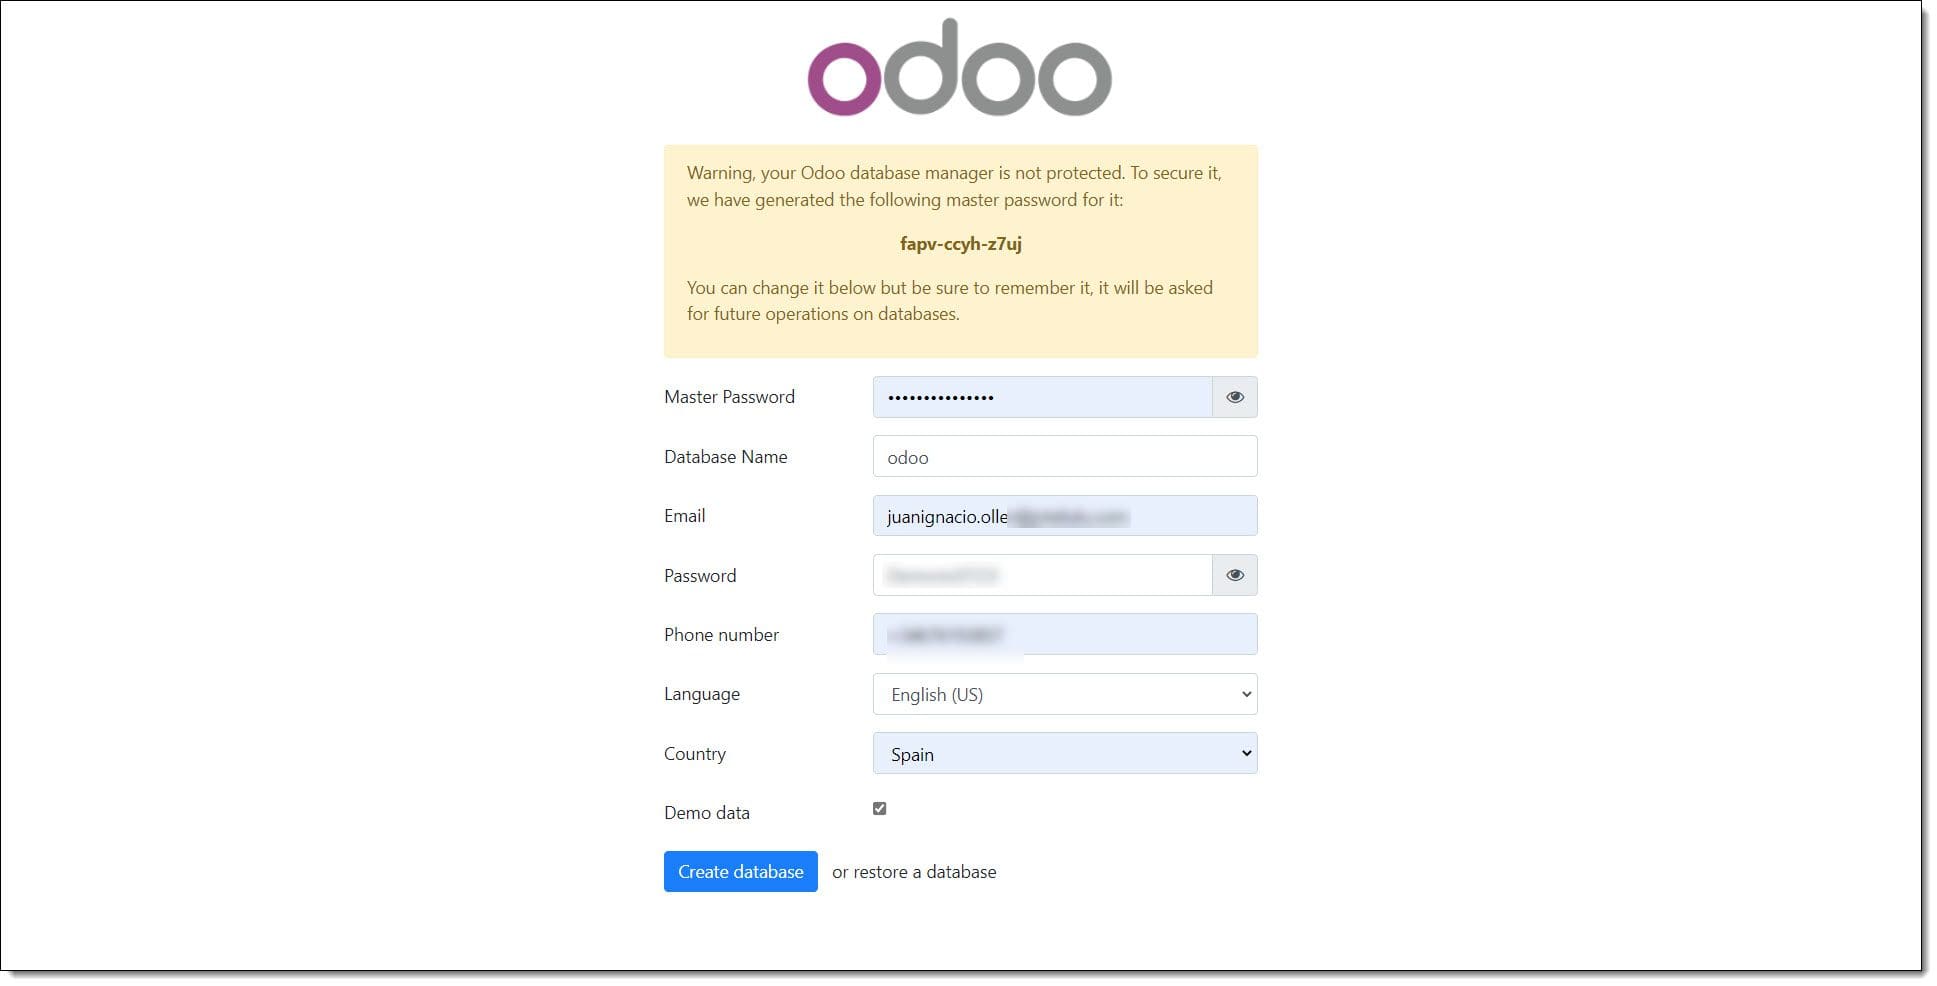 Part 5 - Odoo start screen with configuration data filled in